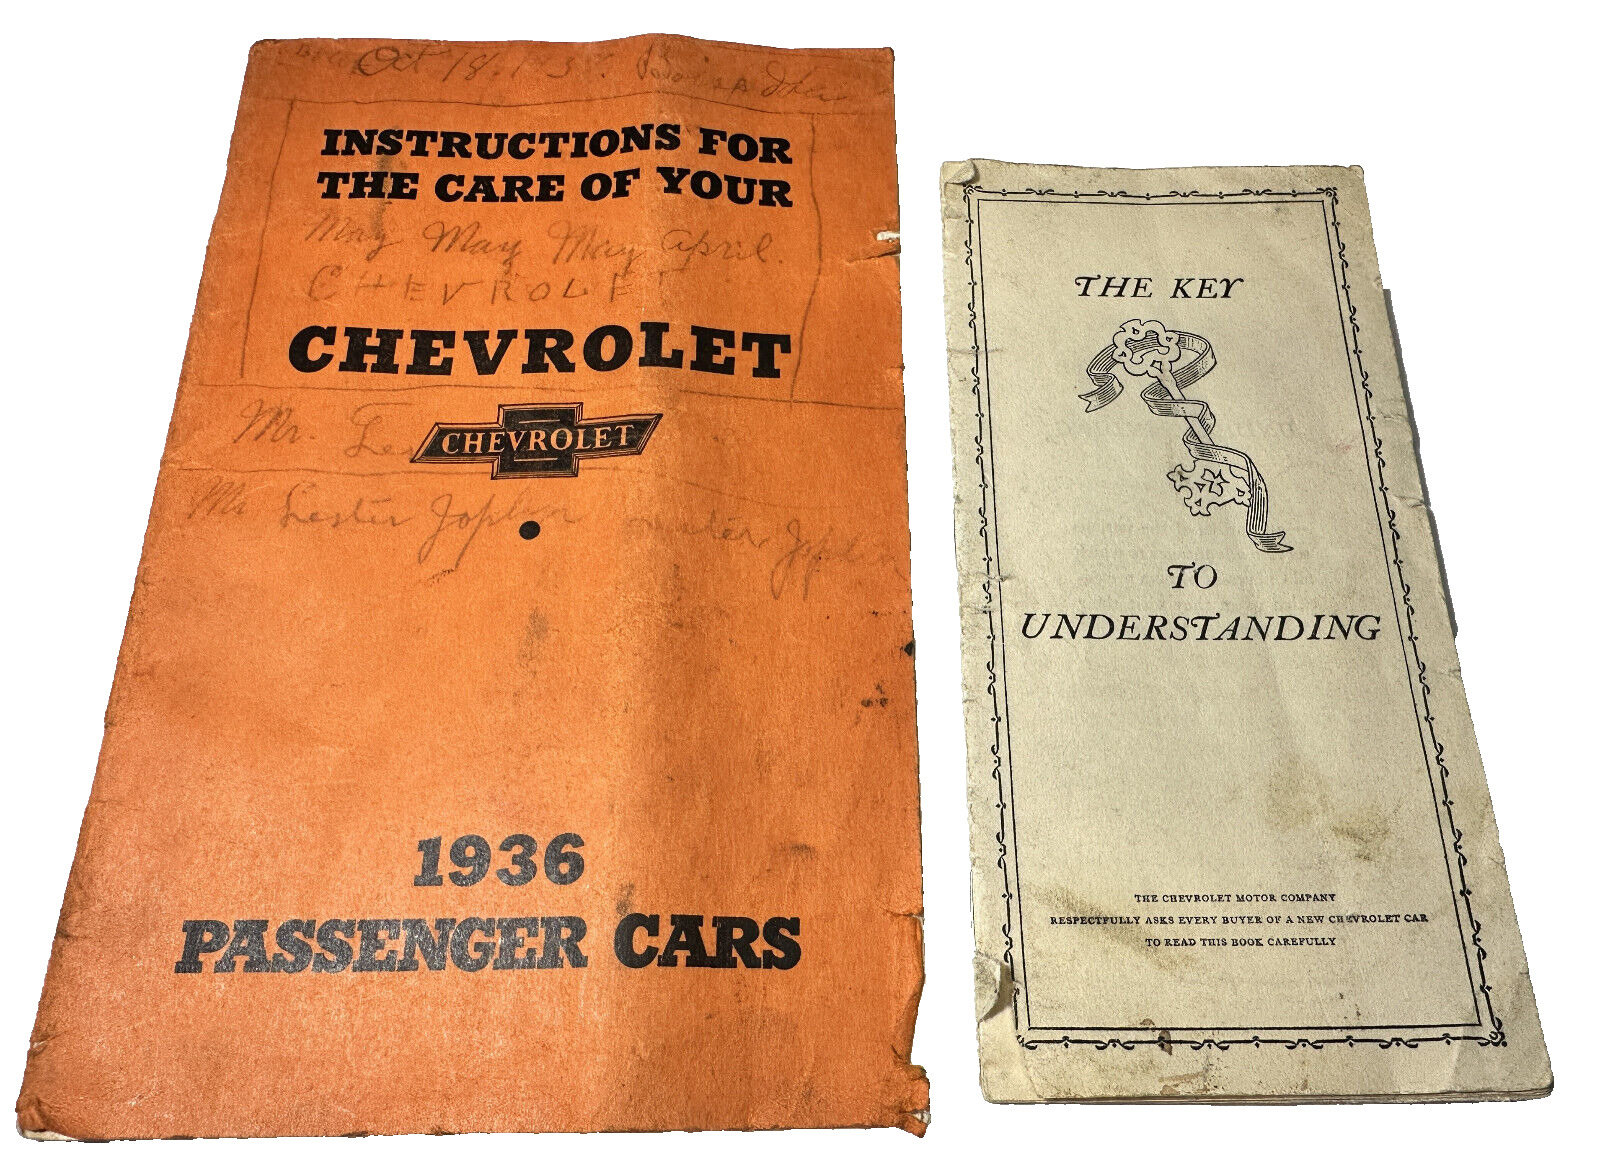 Care Of Your Chevy 1936 Passenger Cars And Keys To Understanding Lot Of 2